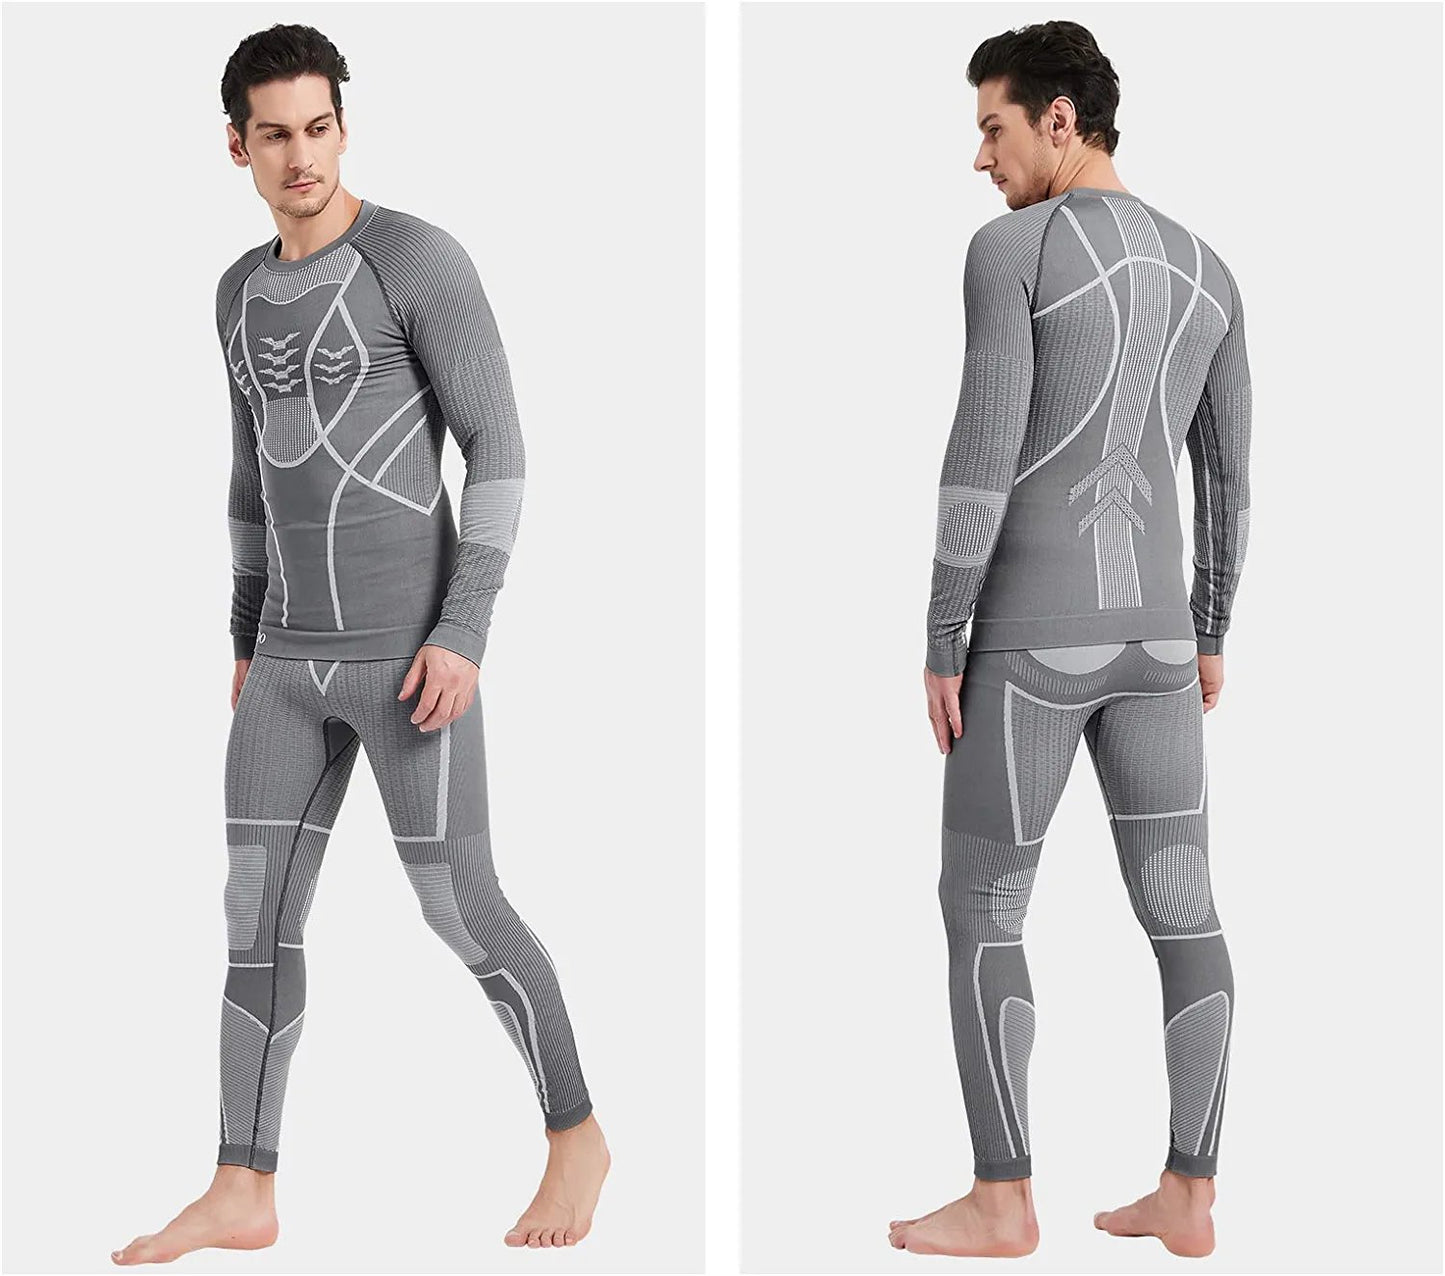 Men's Thermal Underwear Set, Winter Base Layer Sport Long Johns Top & Bottom Suit Compression Cold Weather Gear for Skiing